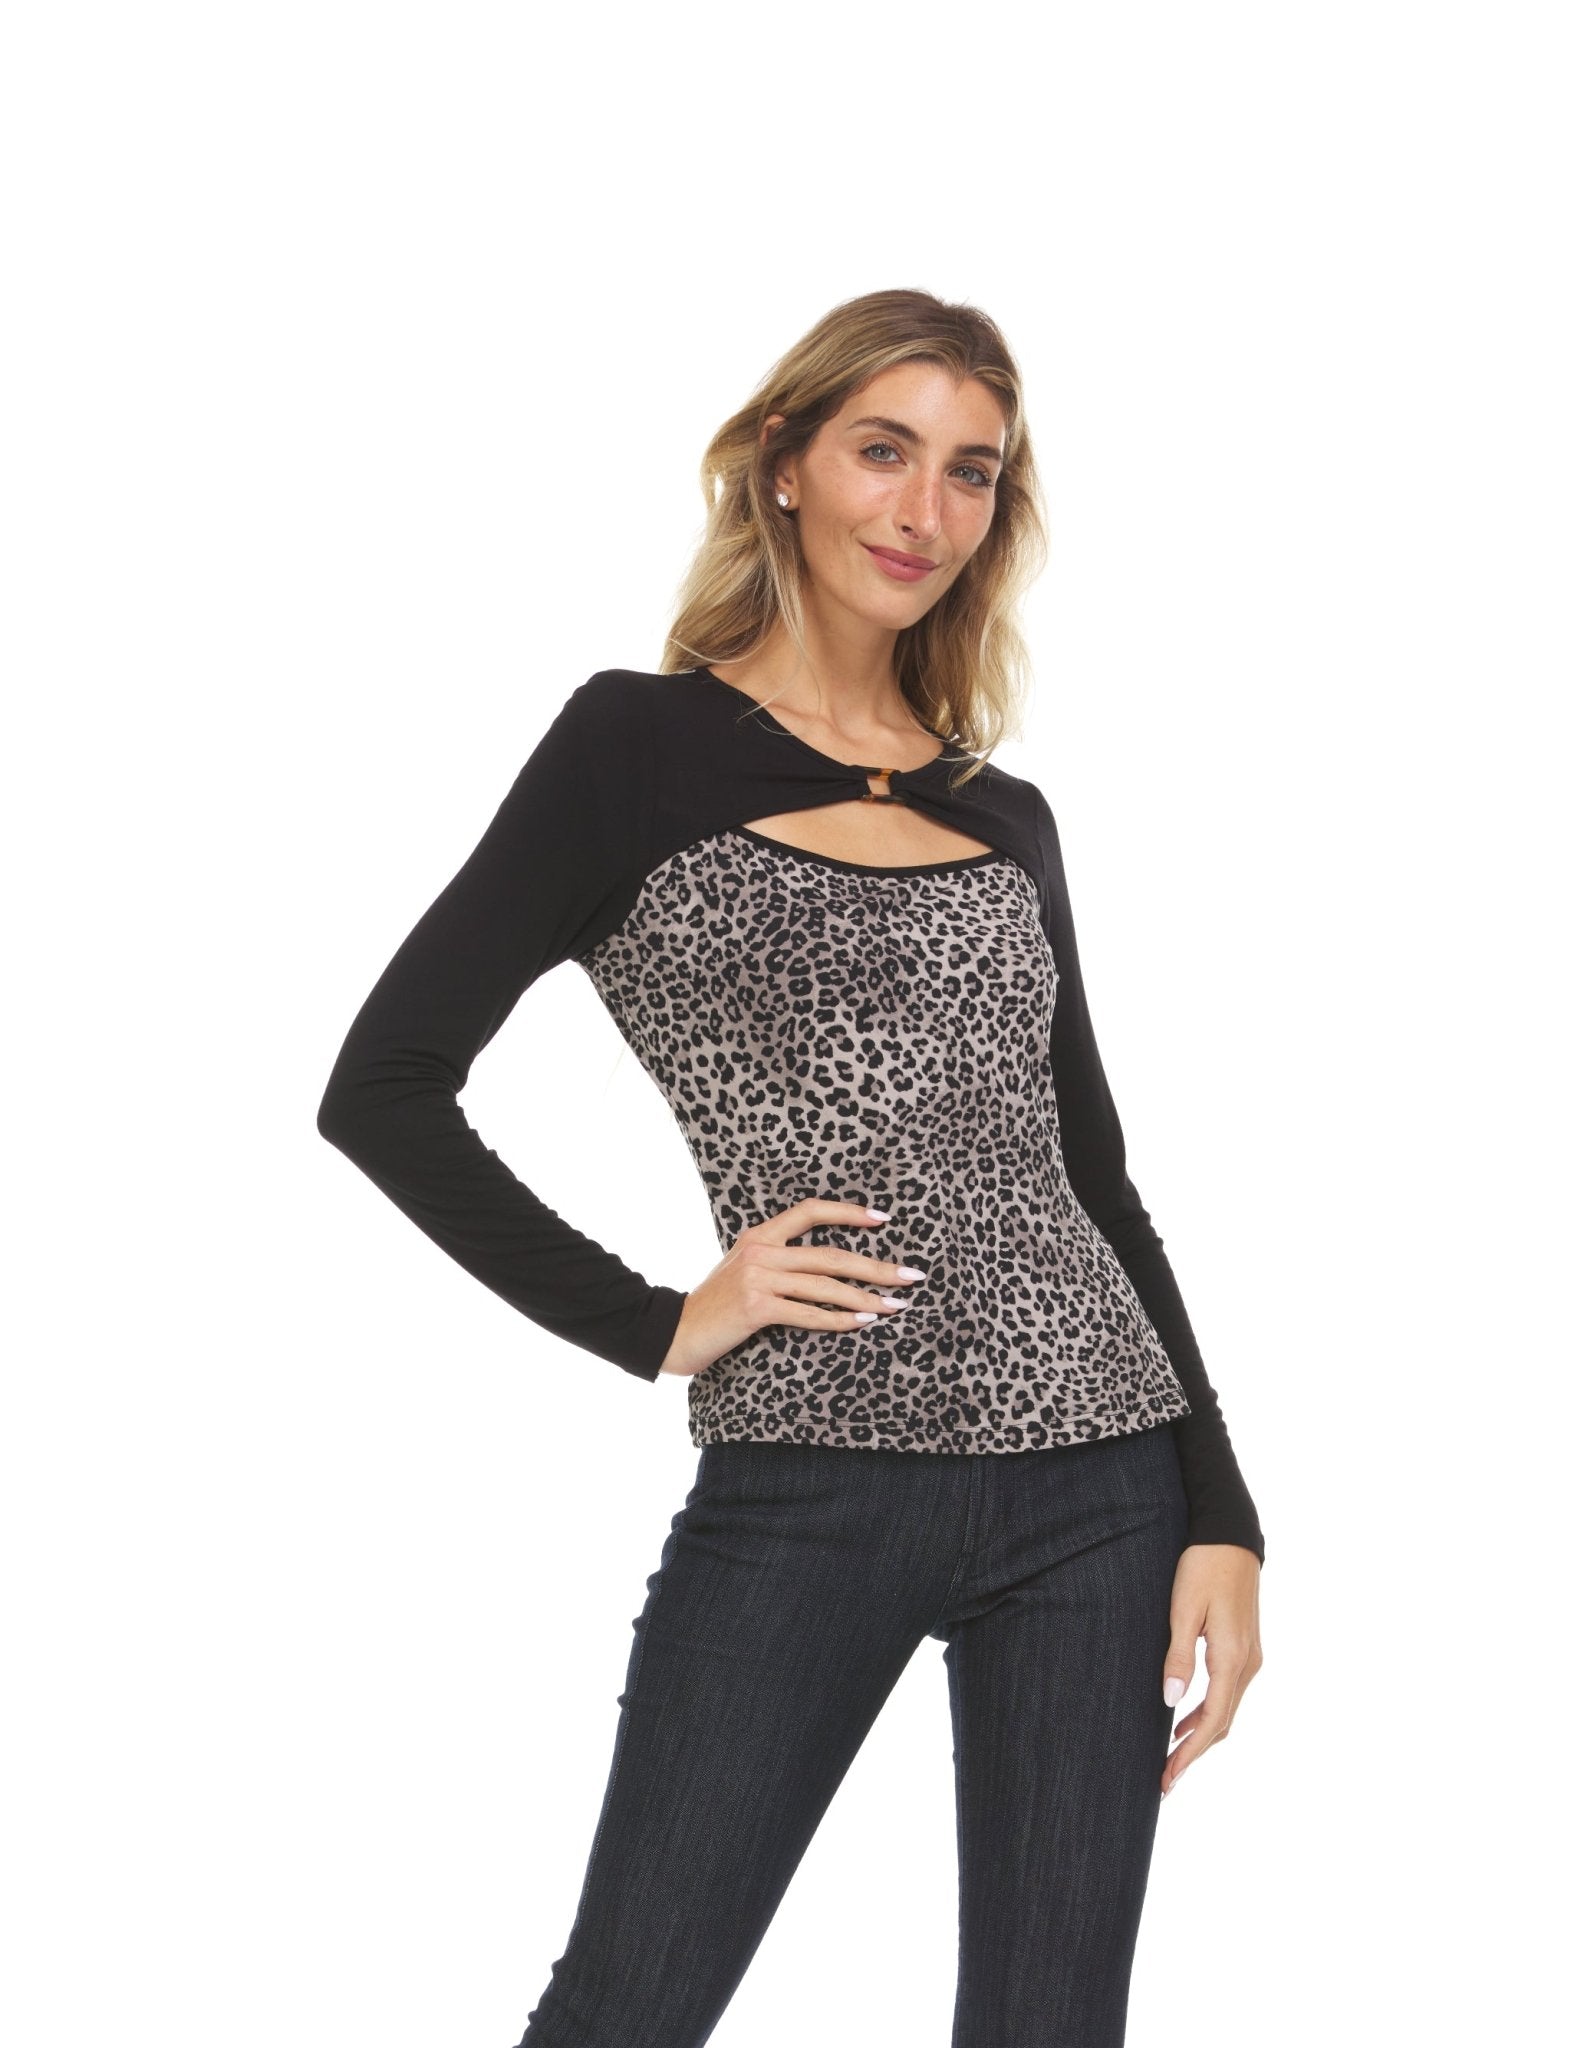 Animal Print With Cut Out Necklace Novelty Top - DressbarnShirts & Blouses